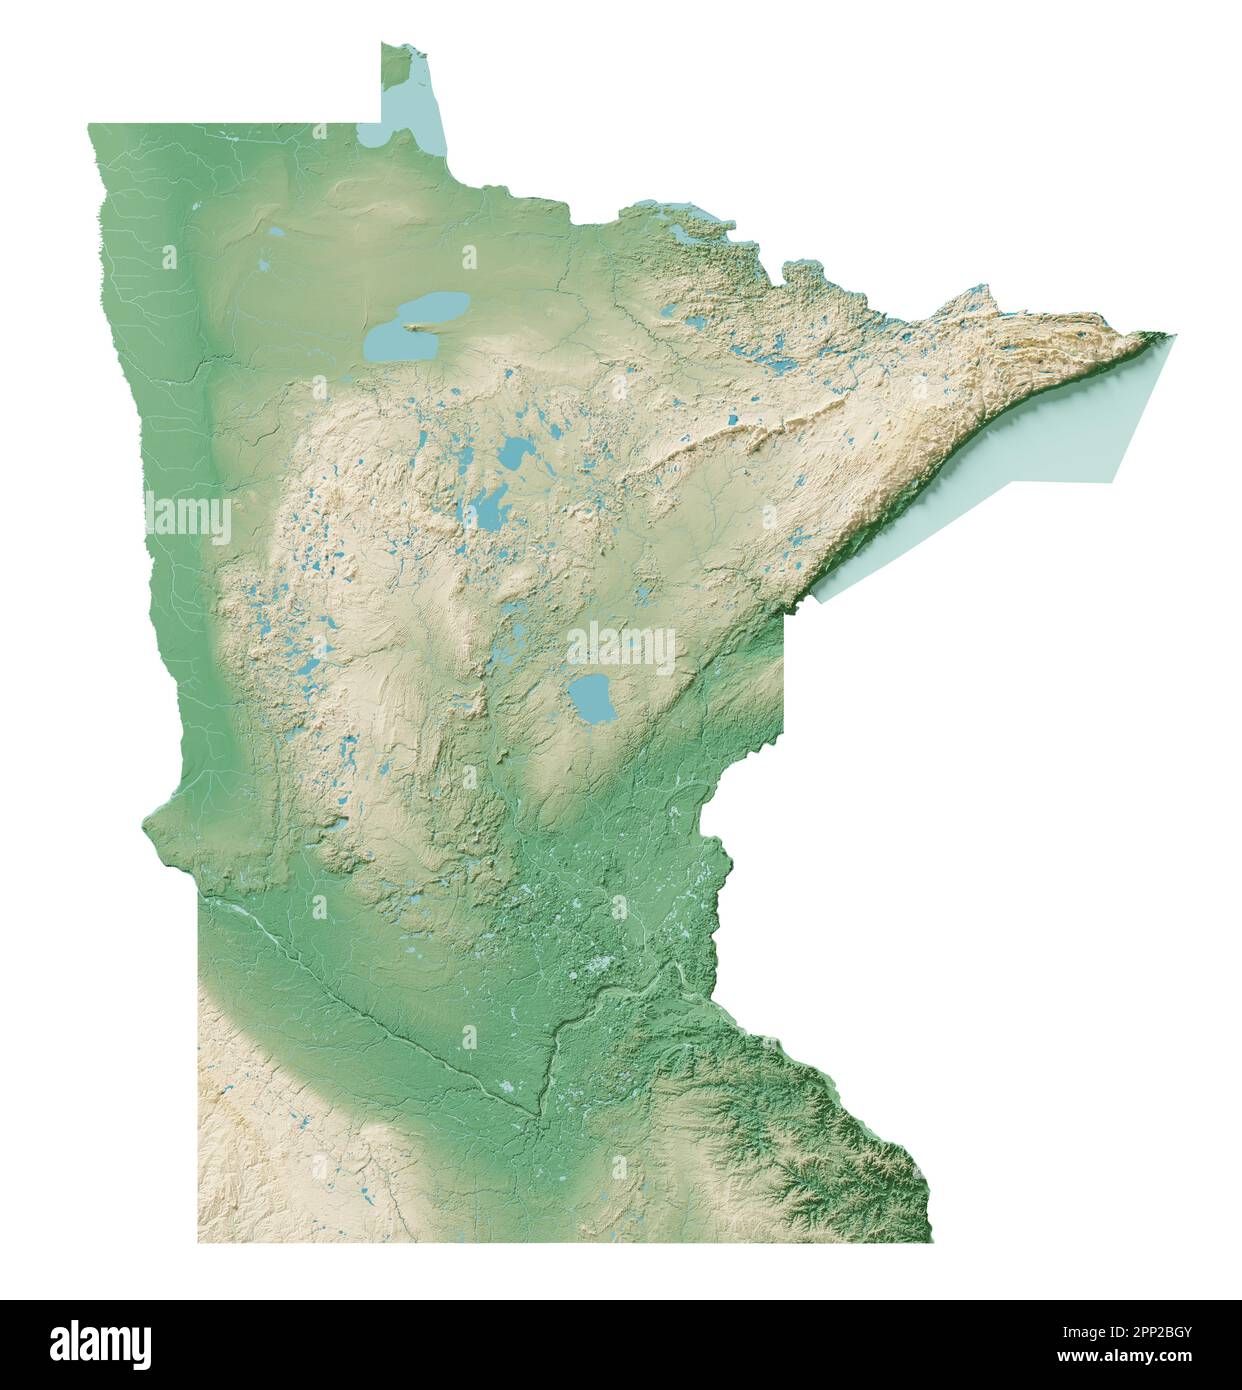 The US state of Minnesota. 3D rendering of shaded relief map with  water bodies. Colored by elevation. White background. Created with satellite data. Stock Photo